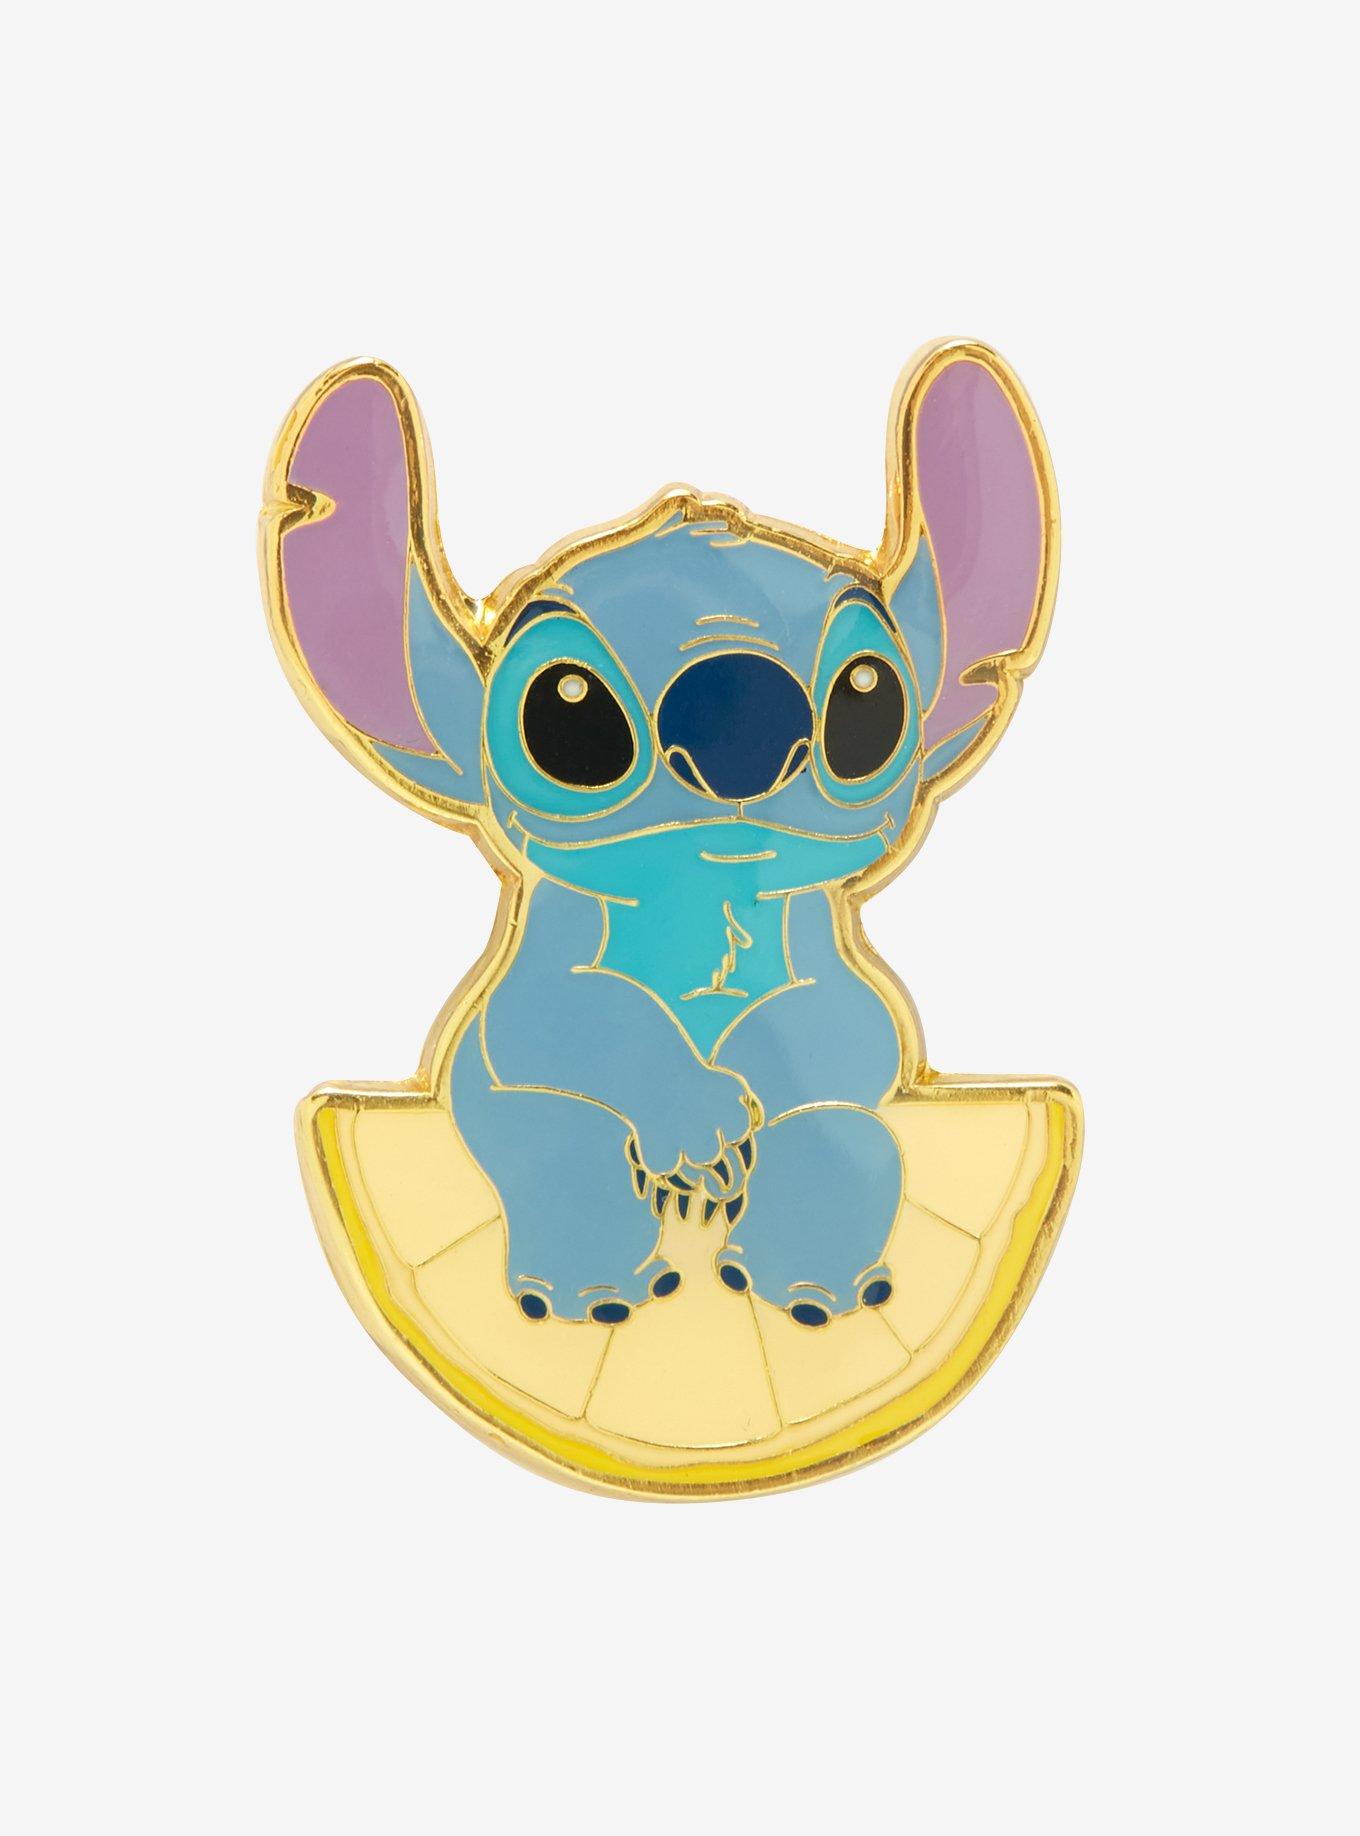 Lilo & Stitch Stained Glass Disney Pin at Hot Topic - Disney Pins Blog